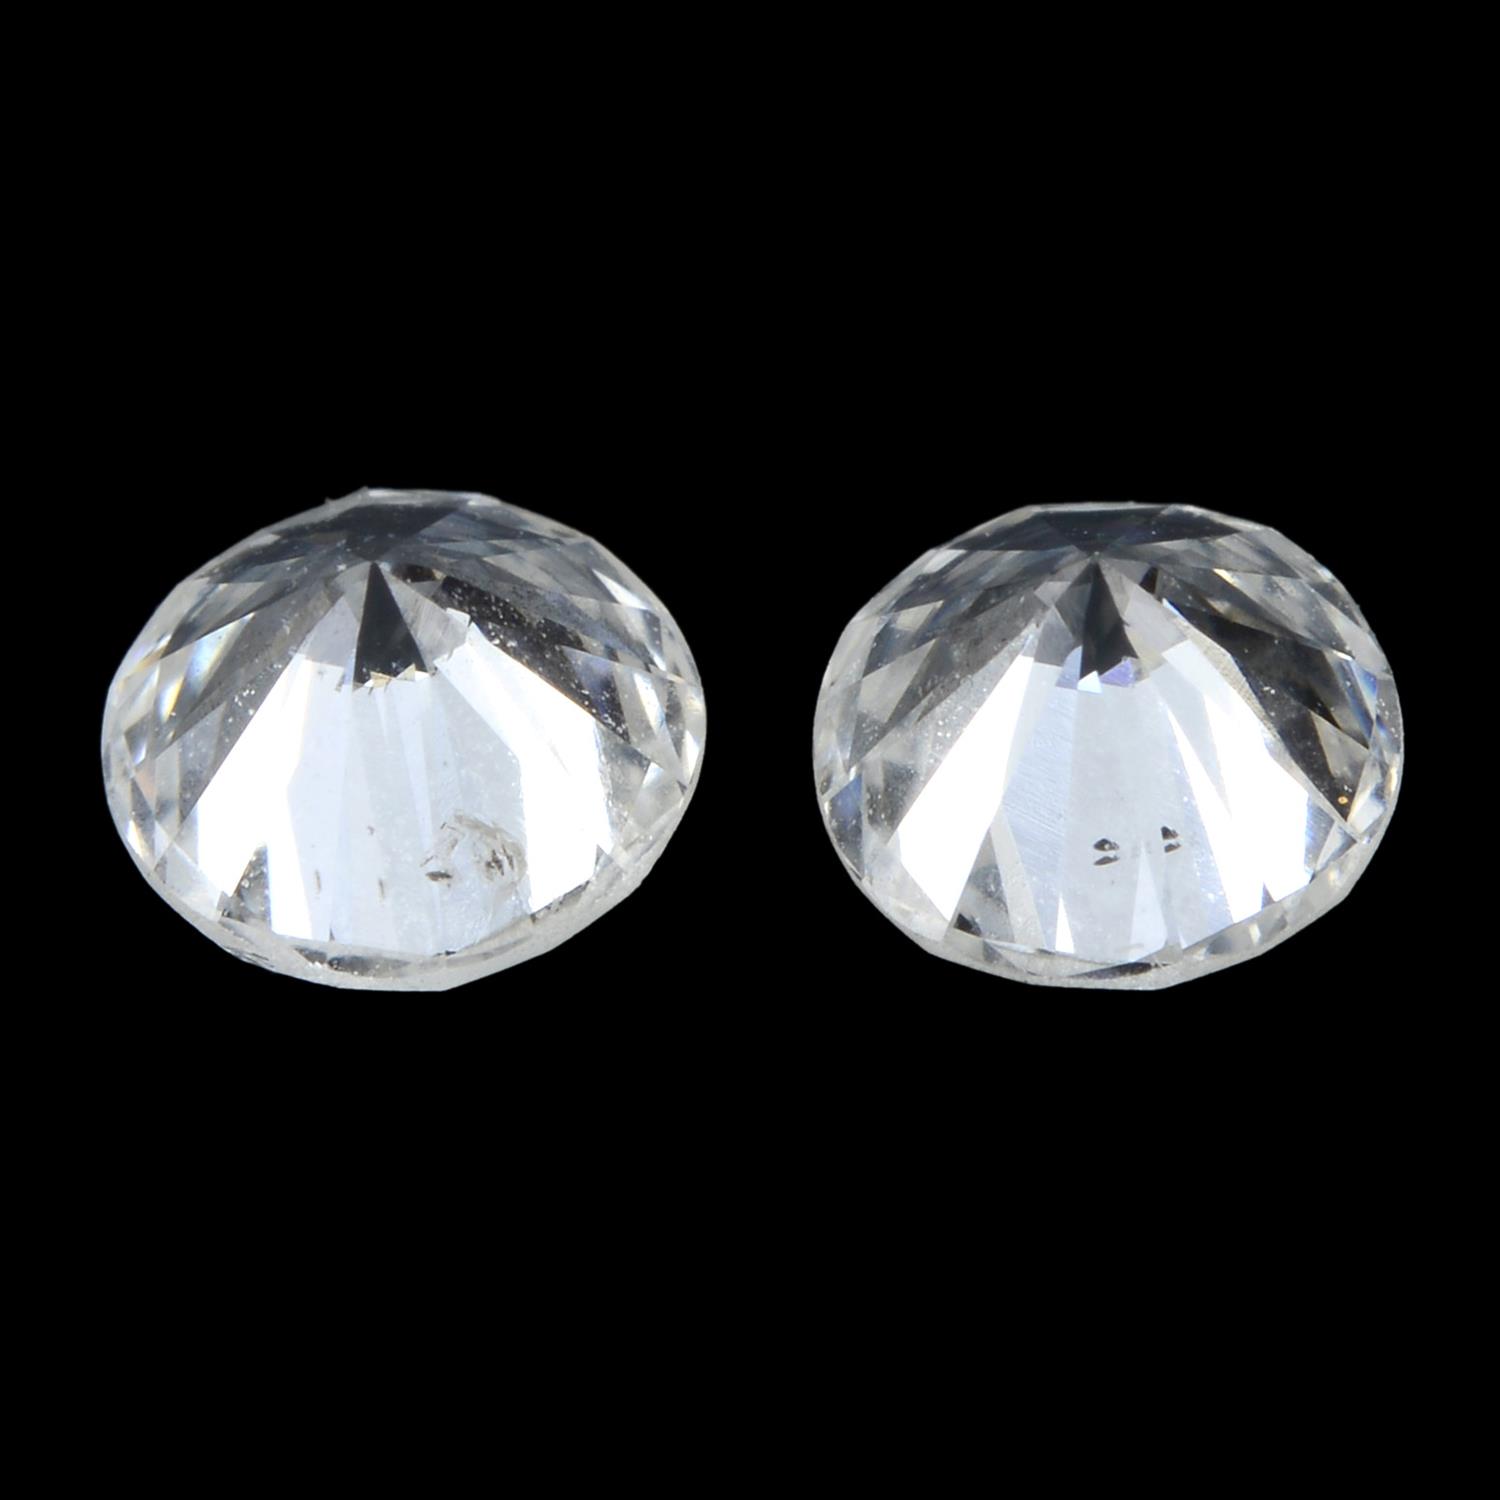 Pair of brilliant cut diamonds weighing 0.52ct - Image 2 of 2